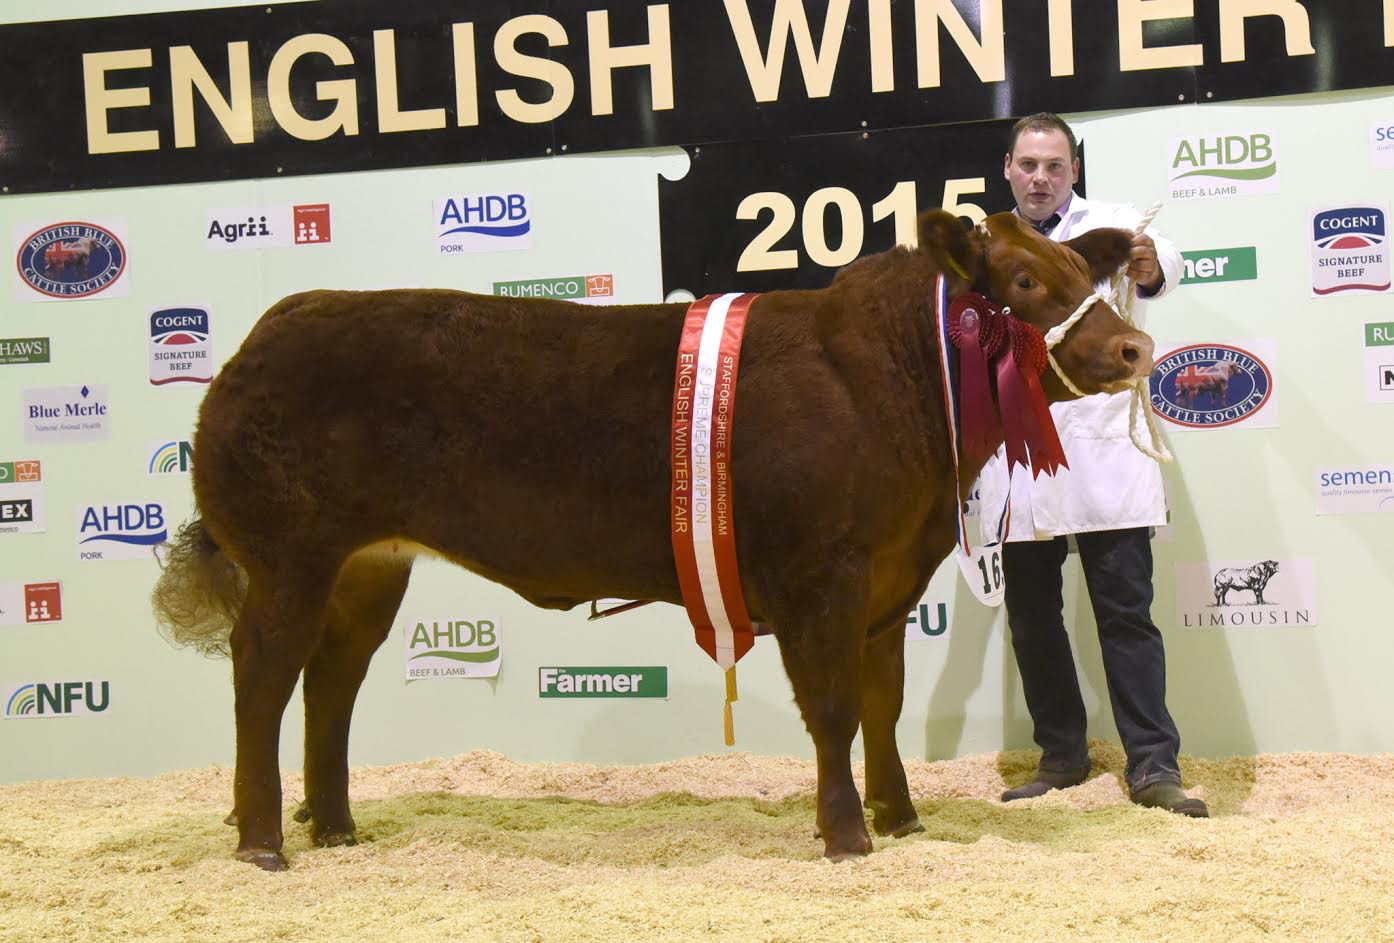 The show features pedigree and non-pedigree beef cattle judging, baby beef cattle judging, trade stands and more